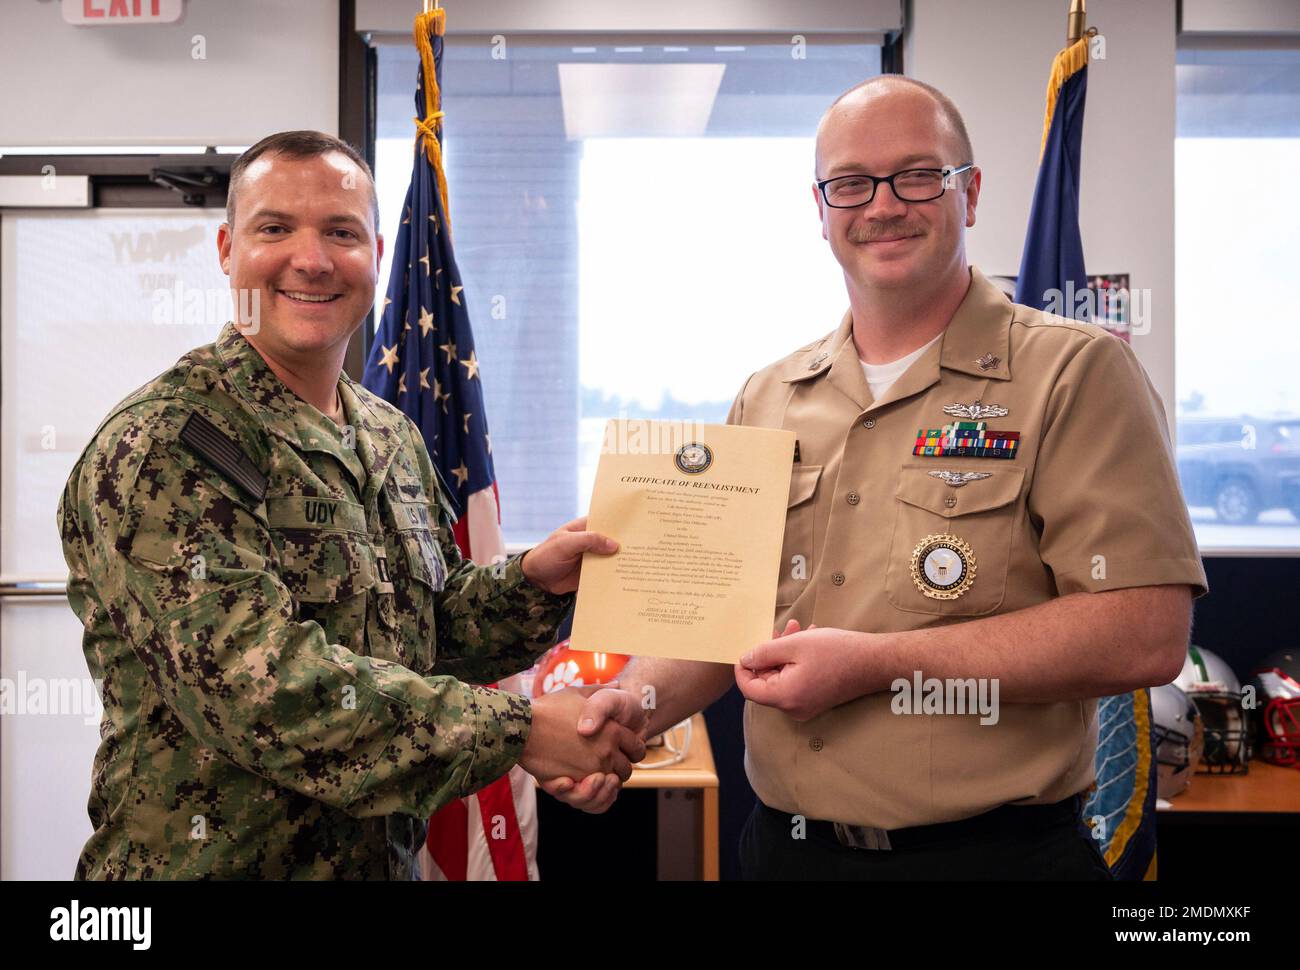 220726-N-WF272-1049 YORK, Pa. (July 26, 2022) U.S. Navy Lt. Joshua Udy, a native of Colorado Springs, Colo., enlisted programs officer assigned to Navy Talent Acquisition Group Philadelphia, presents a reenlistment certificate to Firecontrolman (Aegis) 1st Class Christopher Odierno, a native of San Diego, during a reenlistment ceremony held at Navy Recruiting Station York, July 26, 2022. NTAG Philadelphia encompasses regions of Pennsylvania, New Jersey, Delaware, Maryland and West Virginia, providing recruiting services from more than 30 talent acquisition sites with the overall goal of attrac Stock Photo